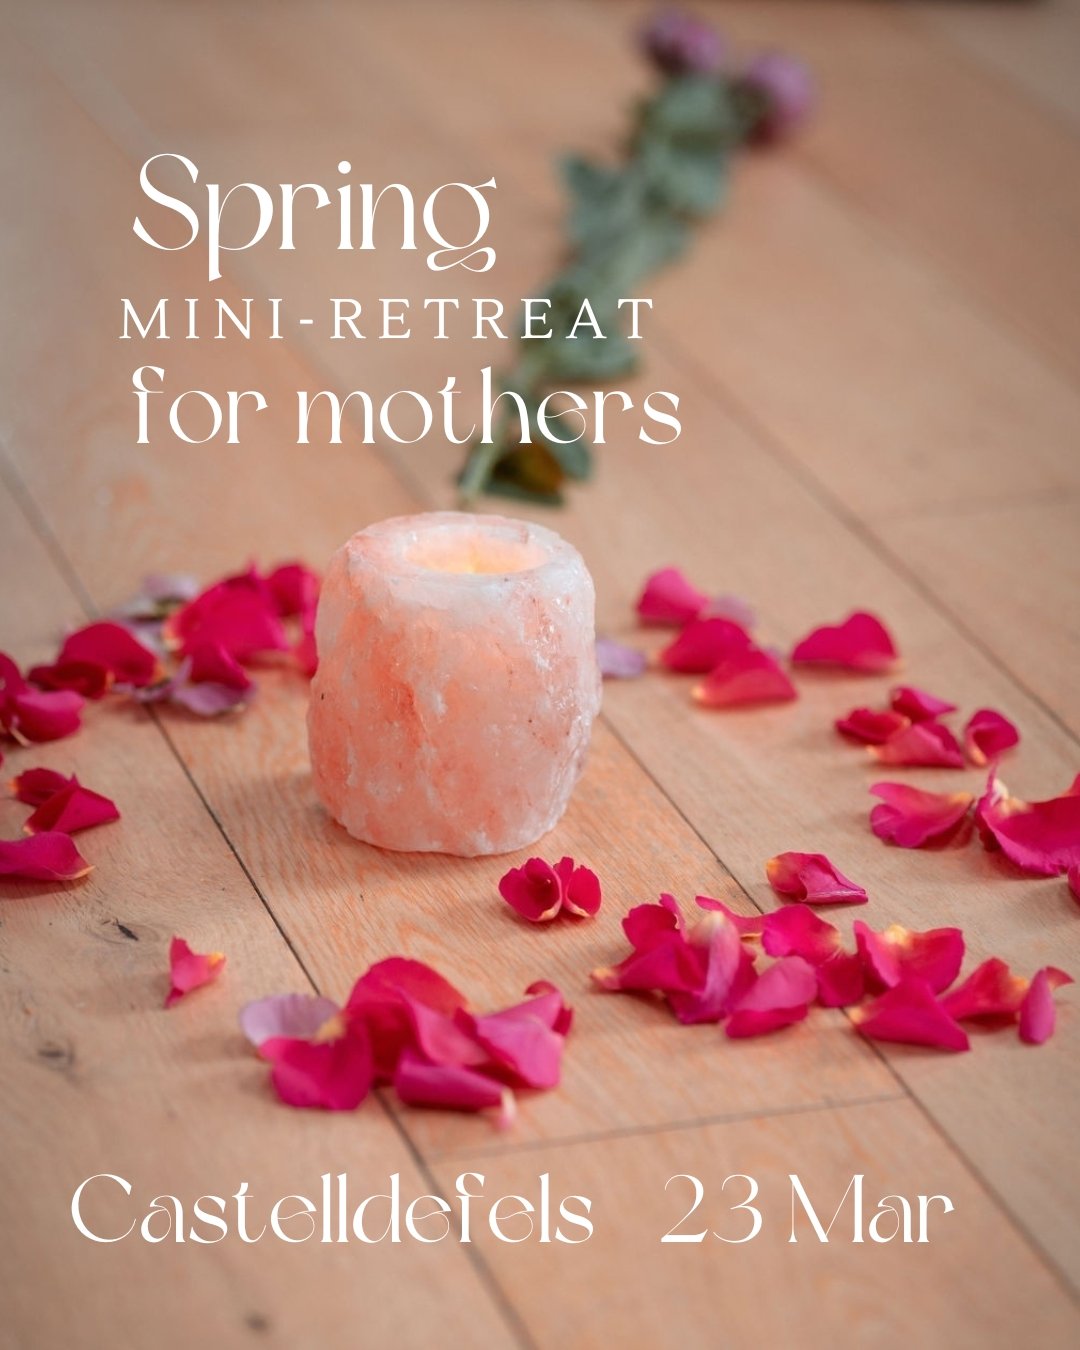 This couldn't come at a better time!  I'm very excited to invite you to my first-ever Mini Retreat for mothers in Castelldefels just a day after my birthday!! 🌻 I invite you to join me in celebrating this special occasion and mark the beginning of S